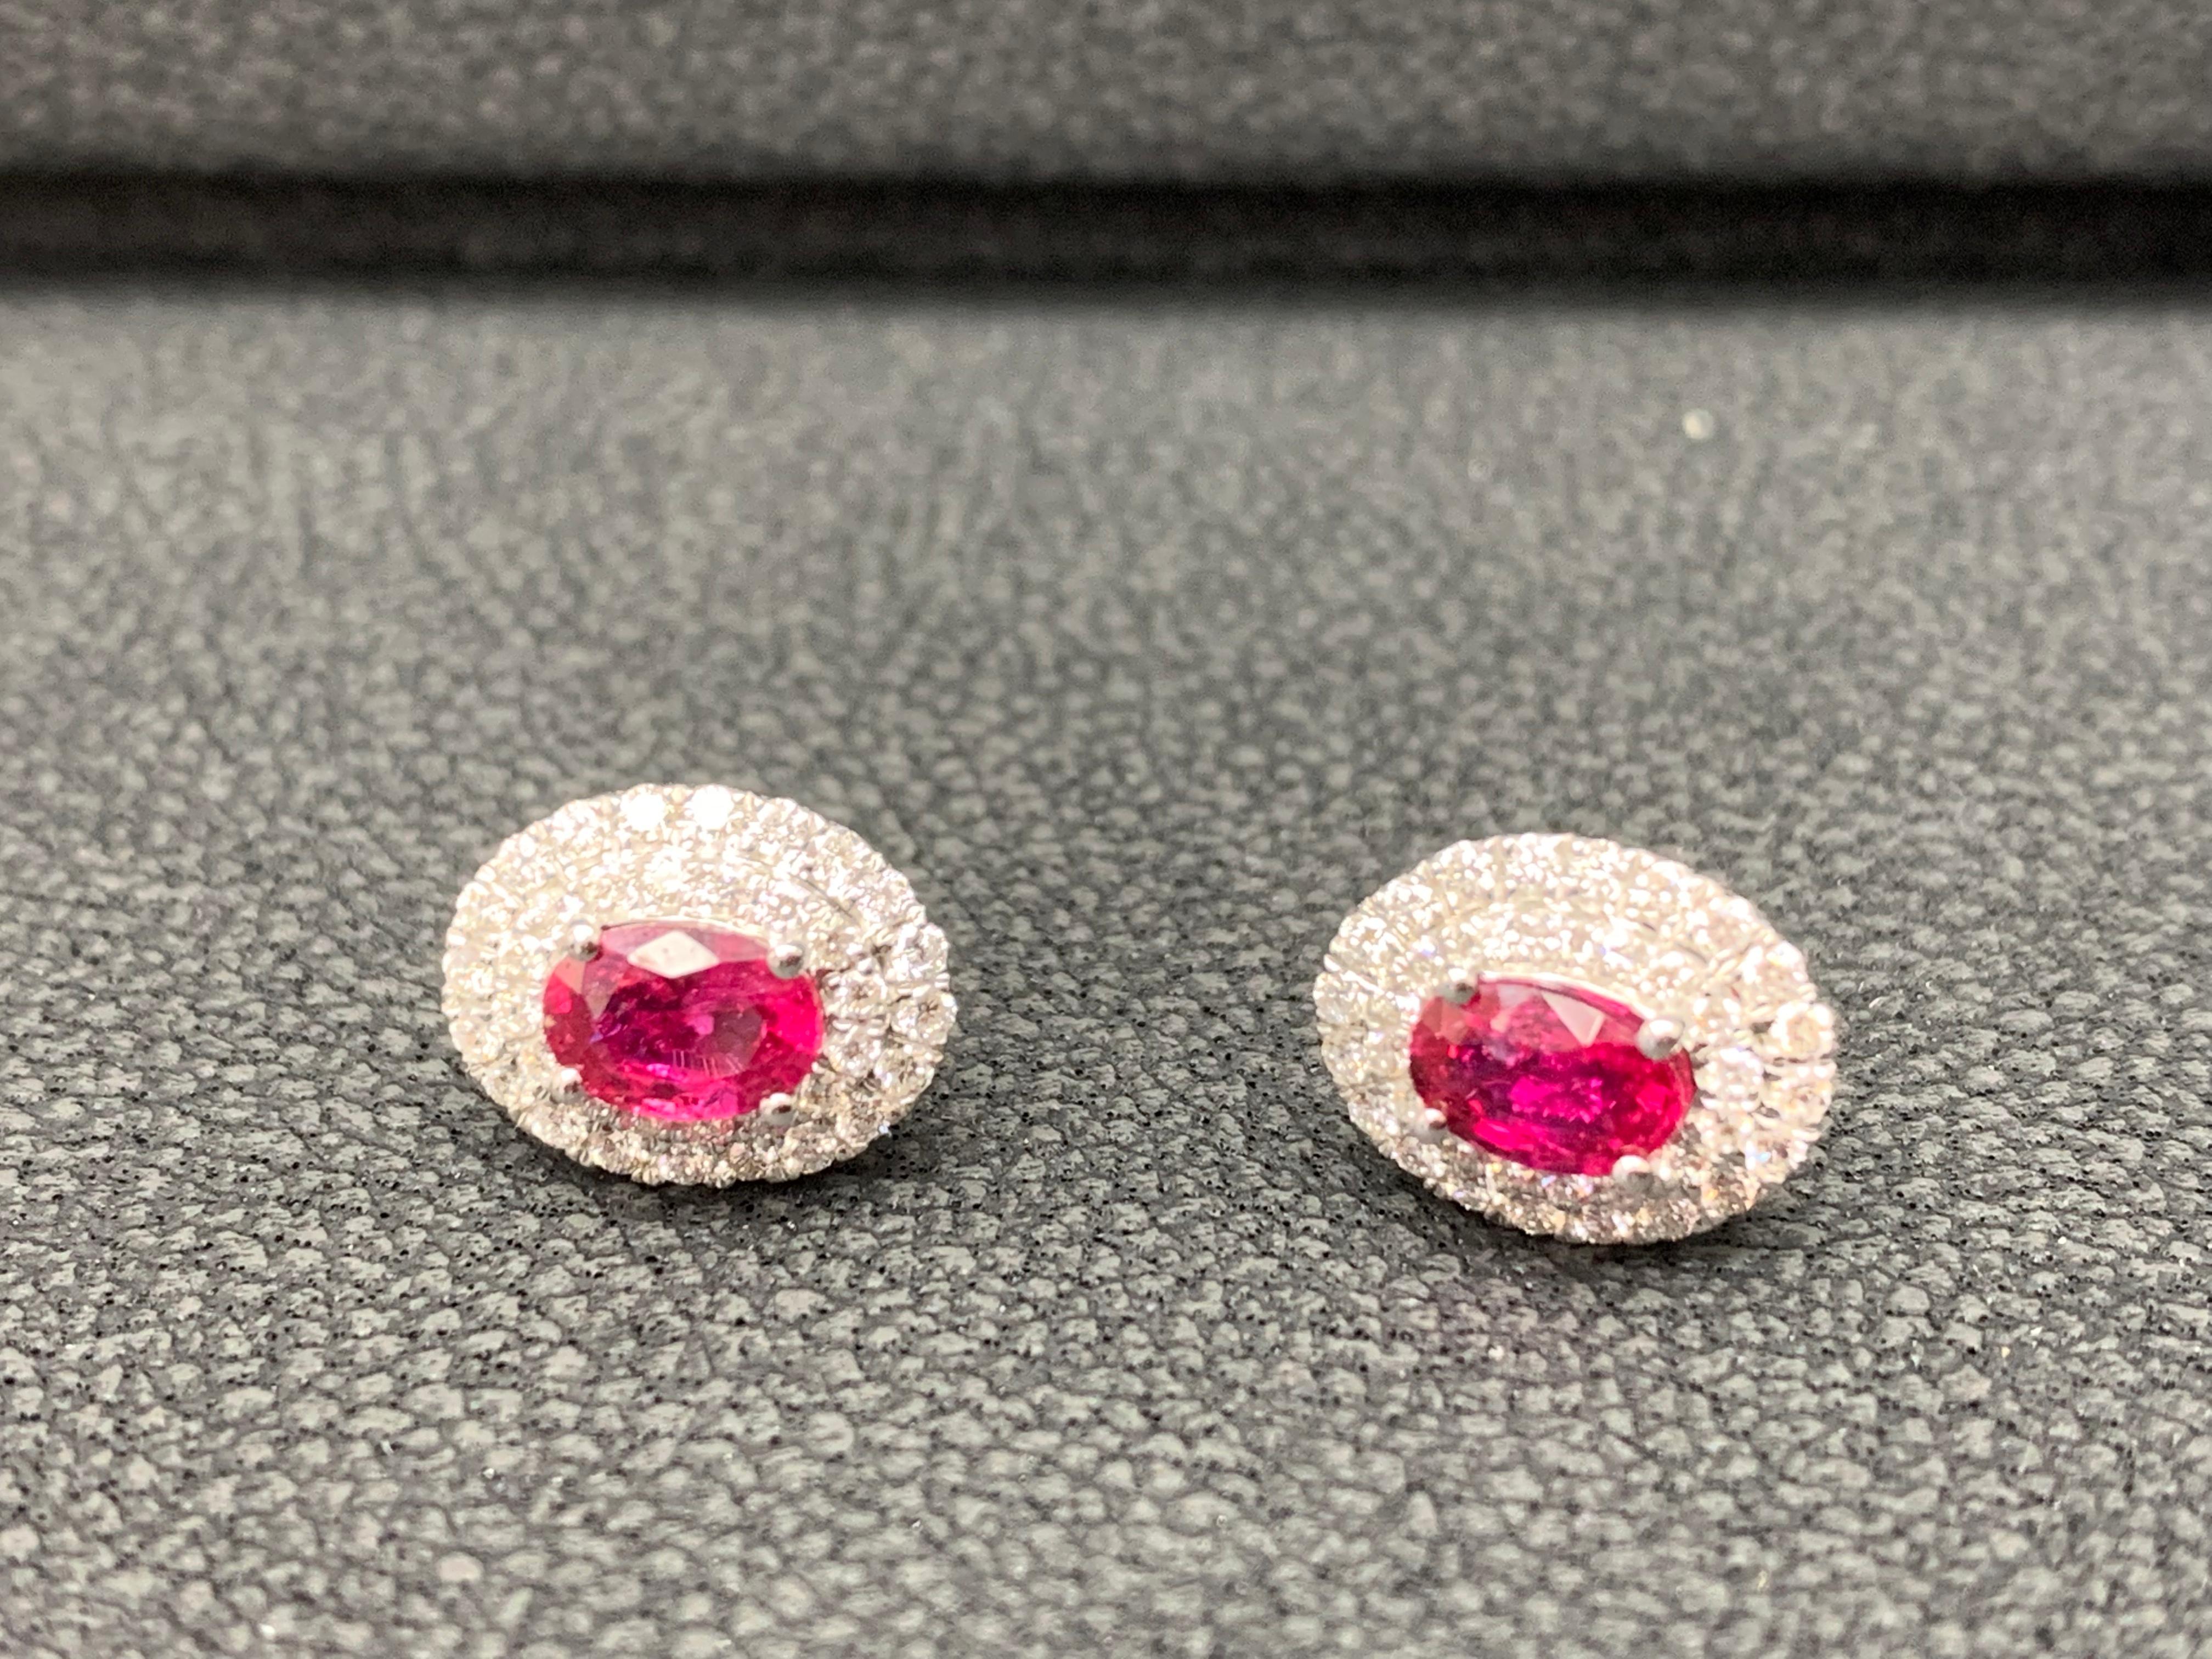 0.98 Carat Oval Cut Ruby and Diamond Stud Earrings in 18K White Gold For Sale 3